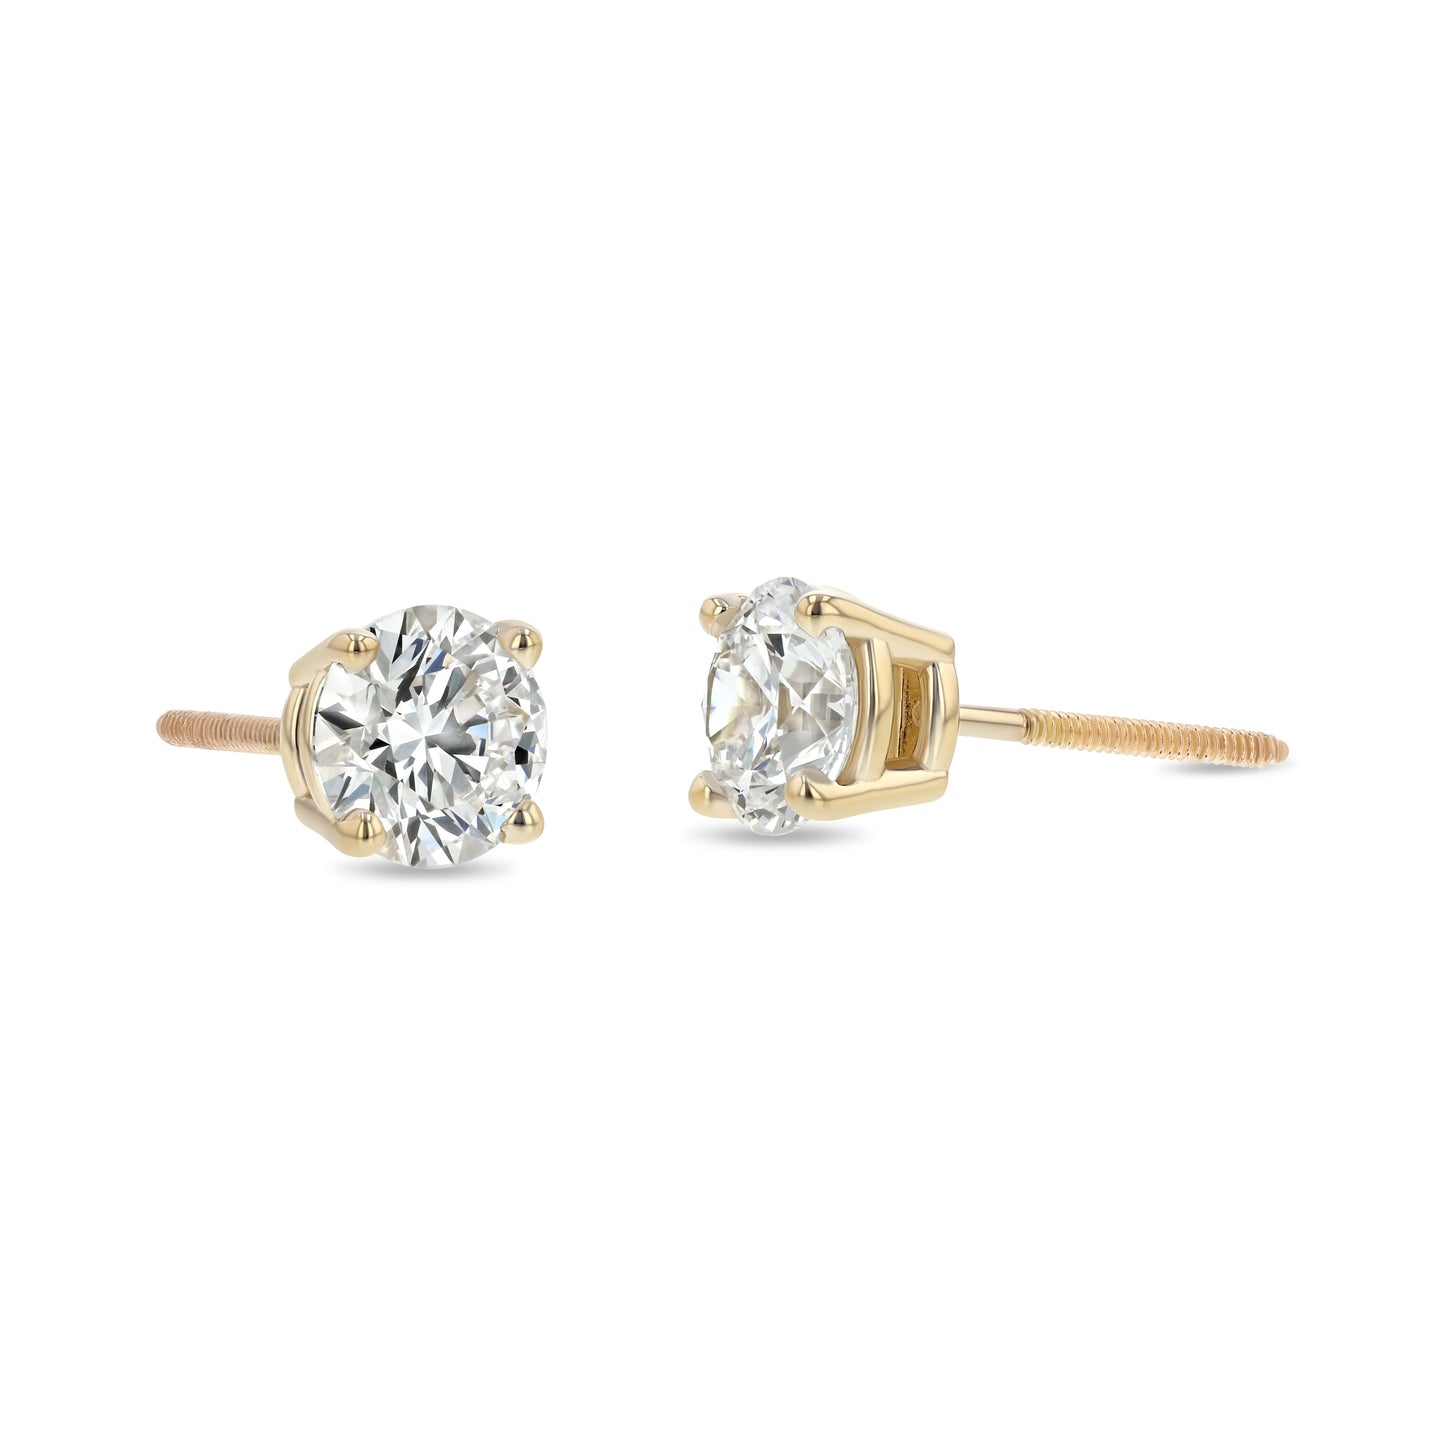 18k Yellow Gold 4-prong Round Diamond Stud Earrings 1/2ctw (4.0mm Ea), M-n Color, Si2-si3 Clarity